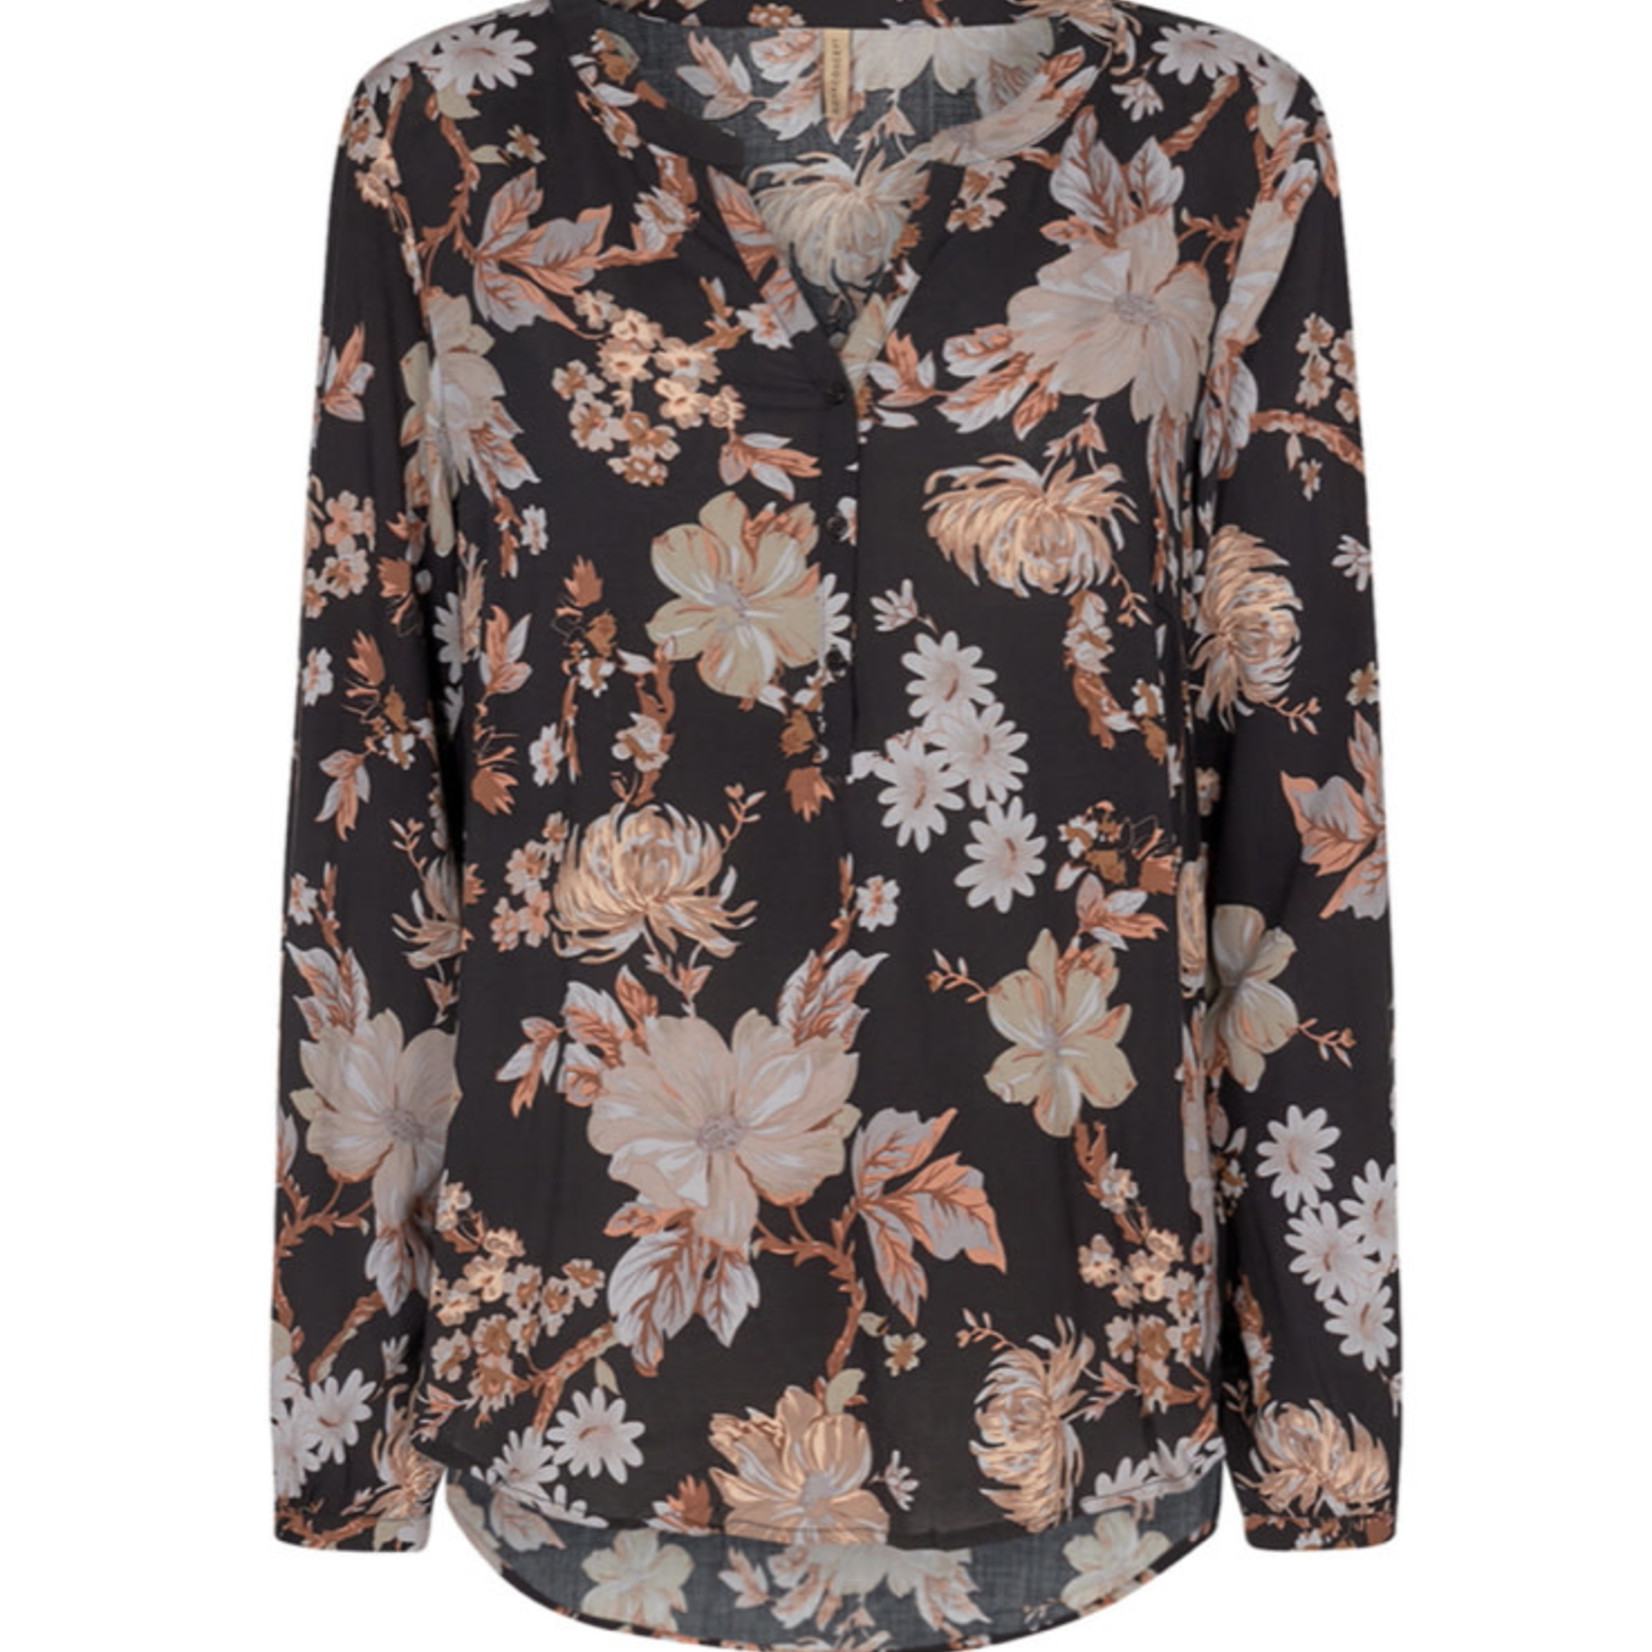 SoyaConcept Long Sleeve Floral Button Down